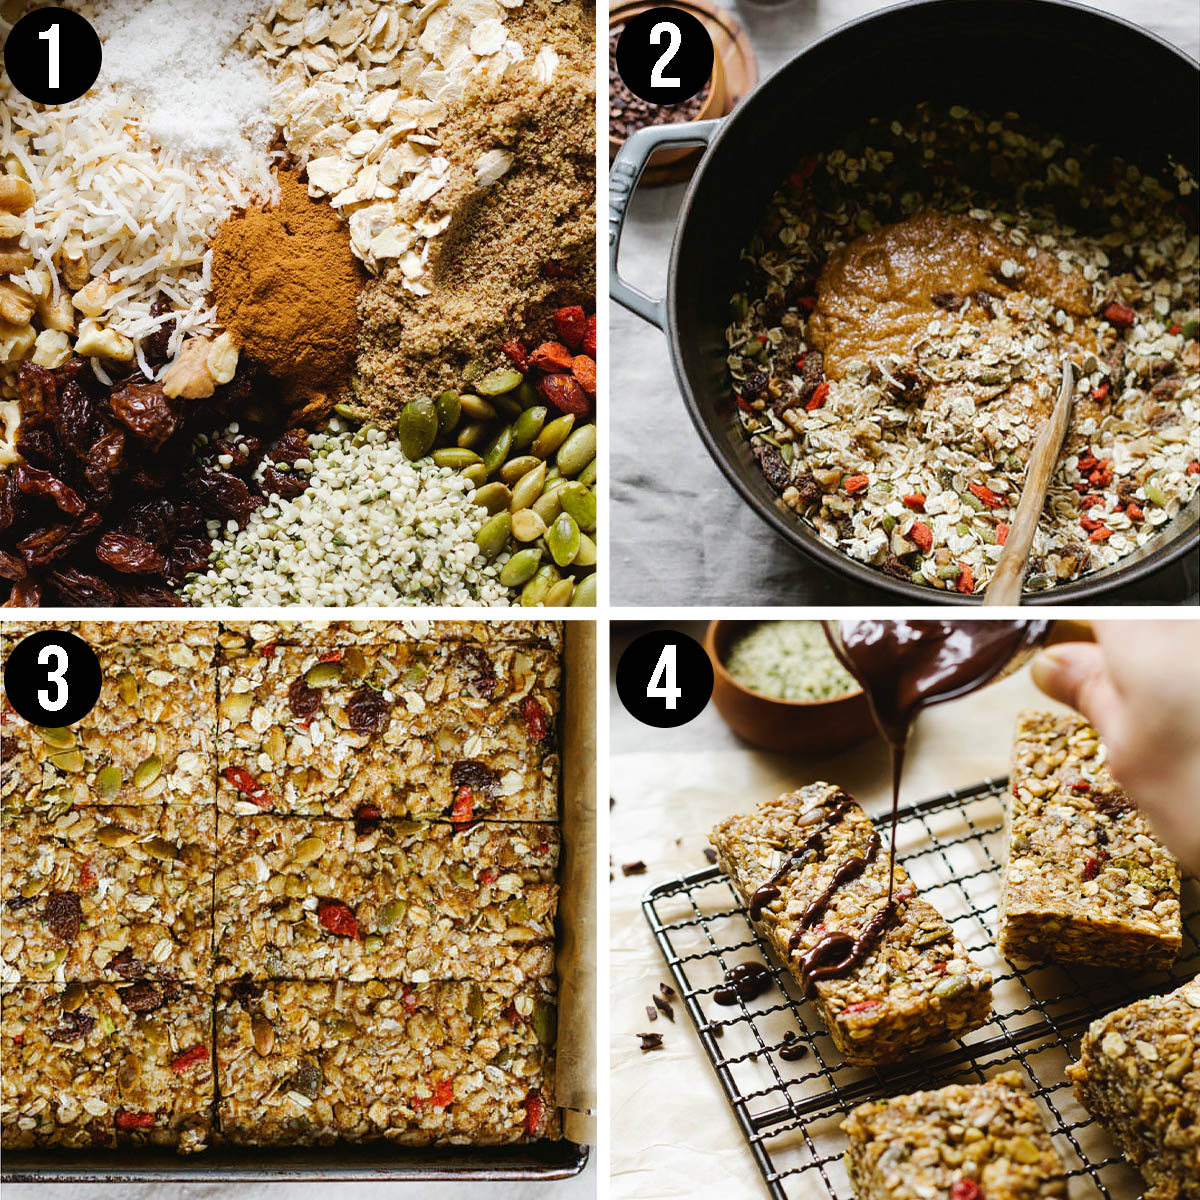 Granola bars steps 1 to 4, dry ingredients, mixing, sliced bars, drizzling with chocolate.